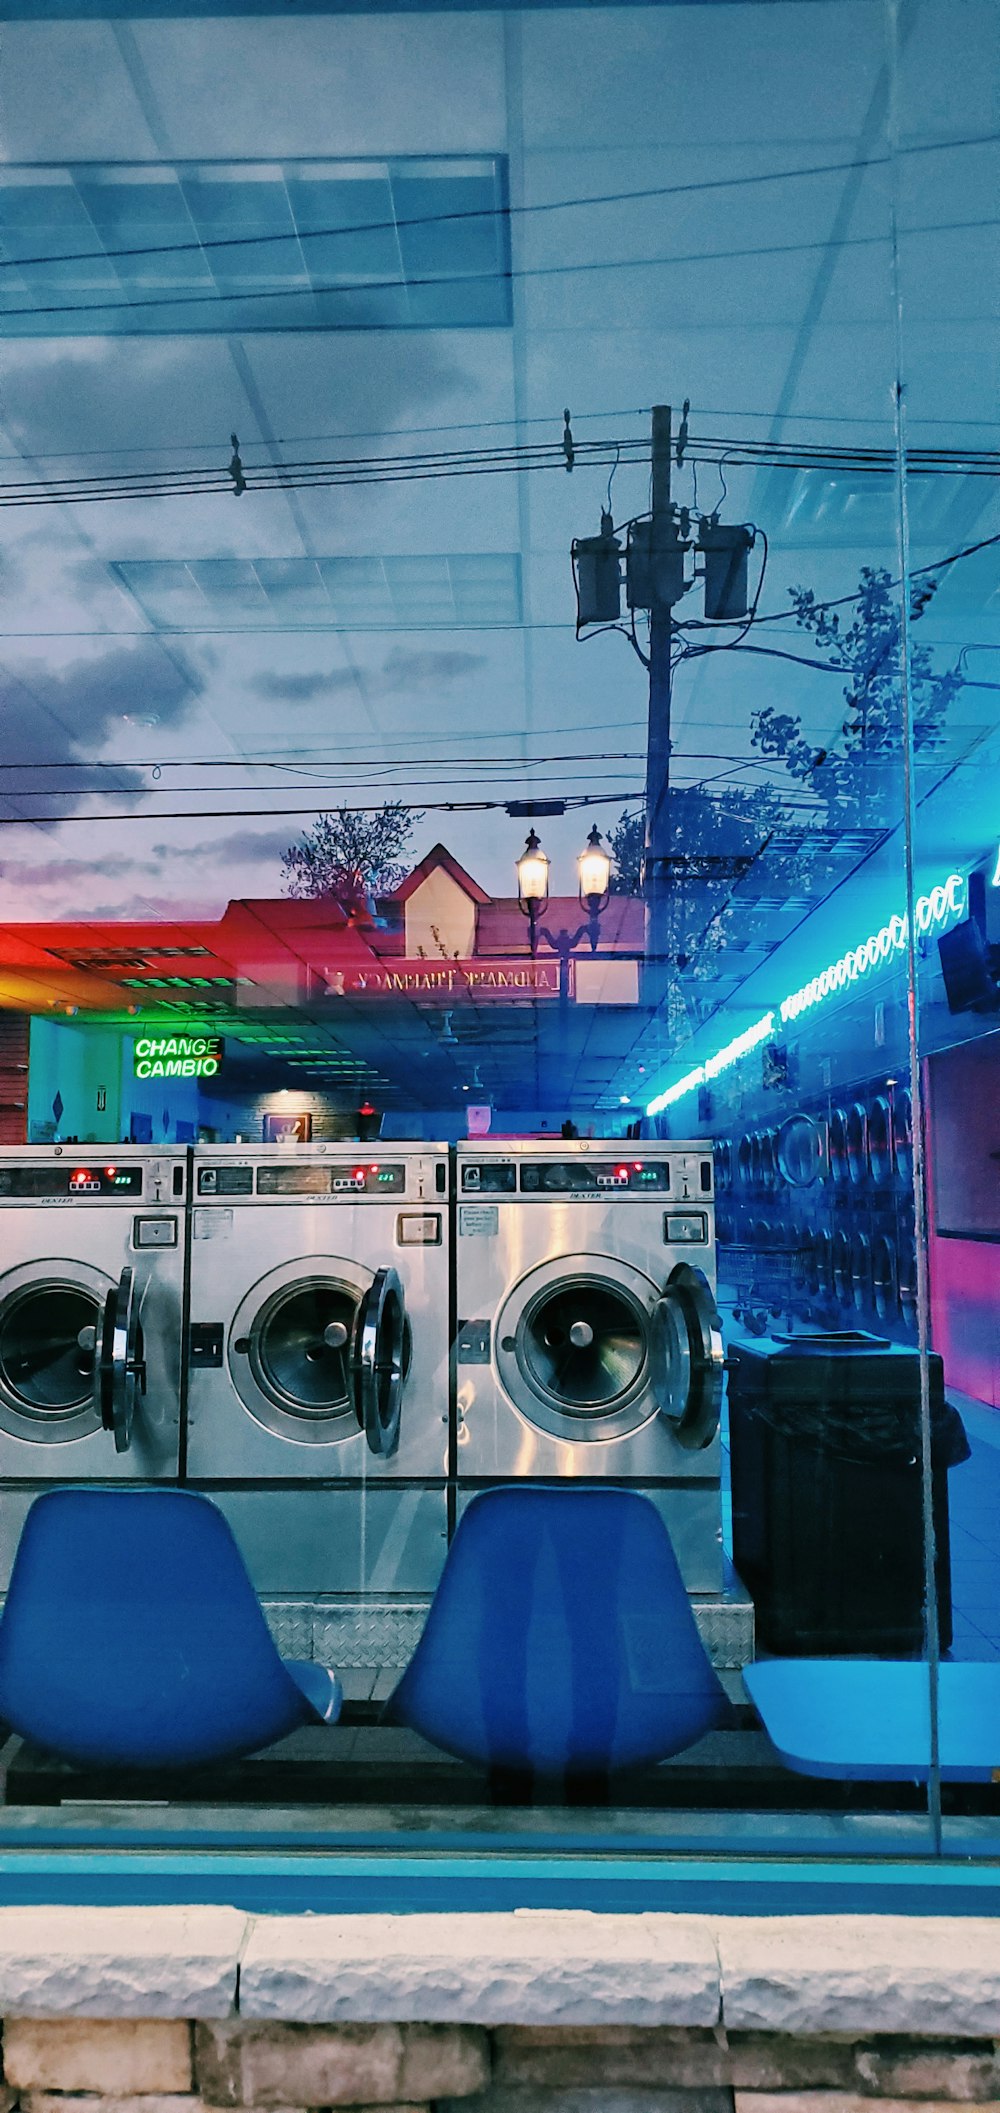 front load washing machines near building during night time